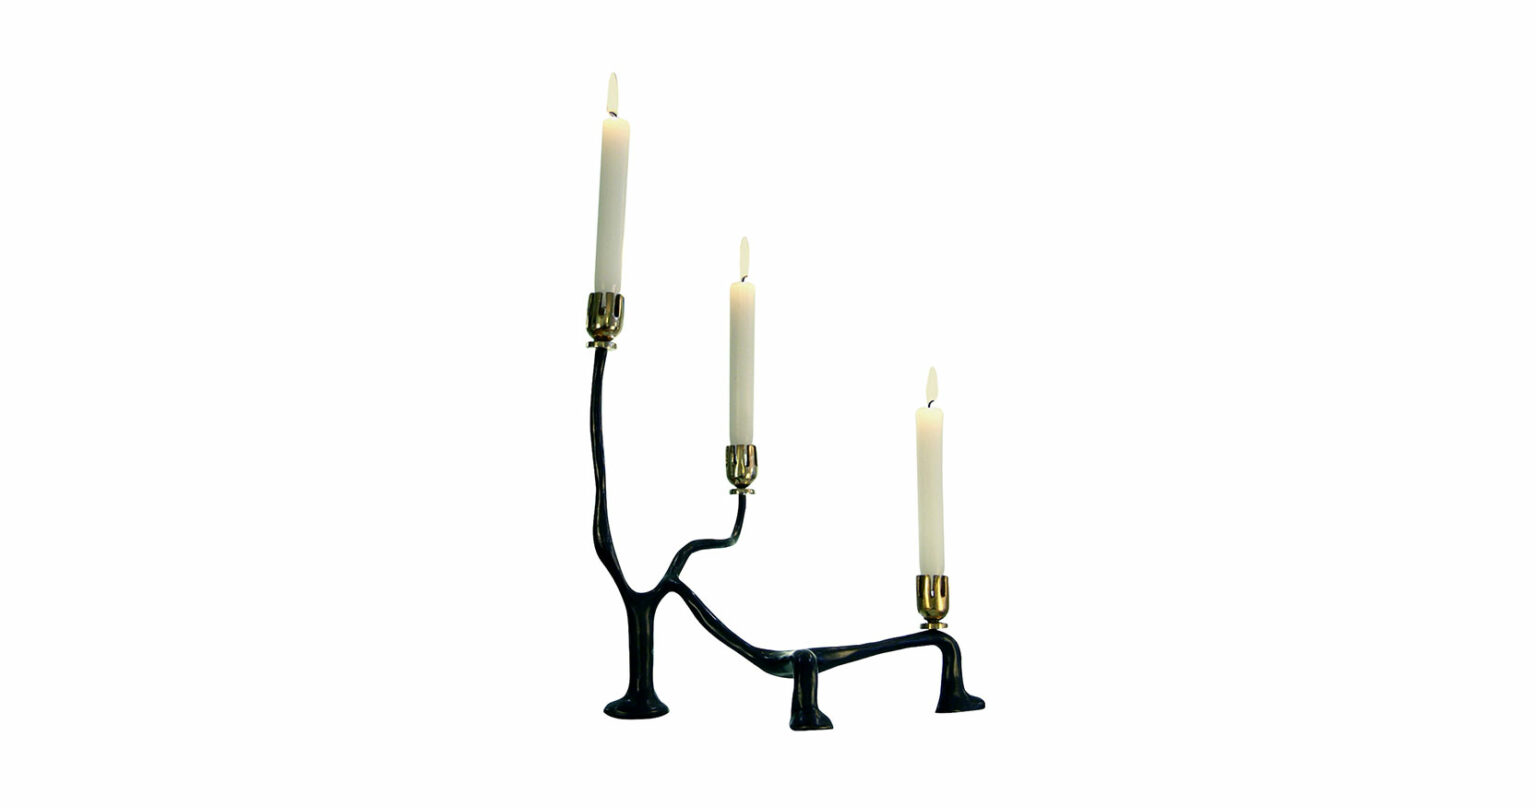 Elizabeth Garouste, black 3-branch candlestick with 3 feet, and 3 sinuous stems ending in 3 gold candle holders with 3 white candles